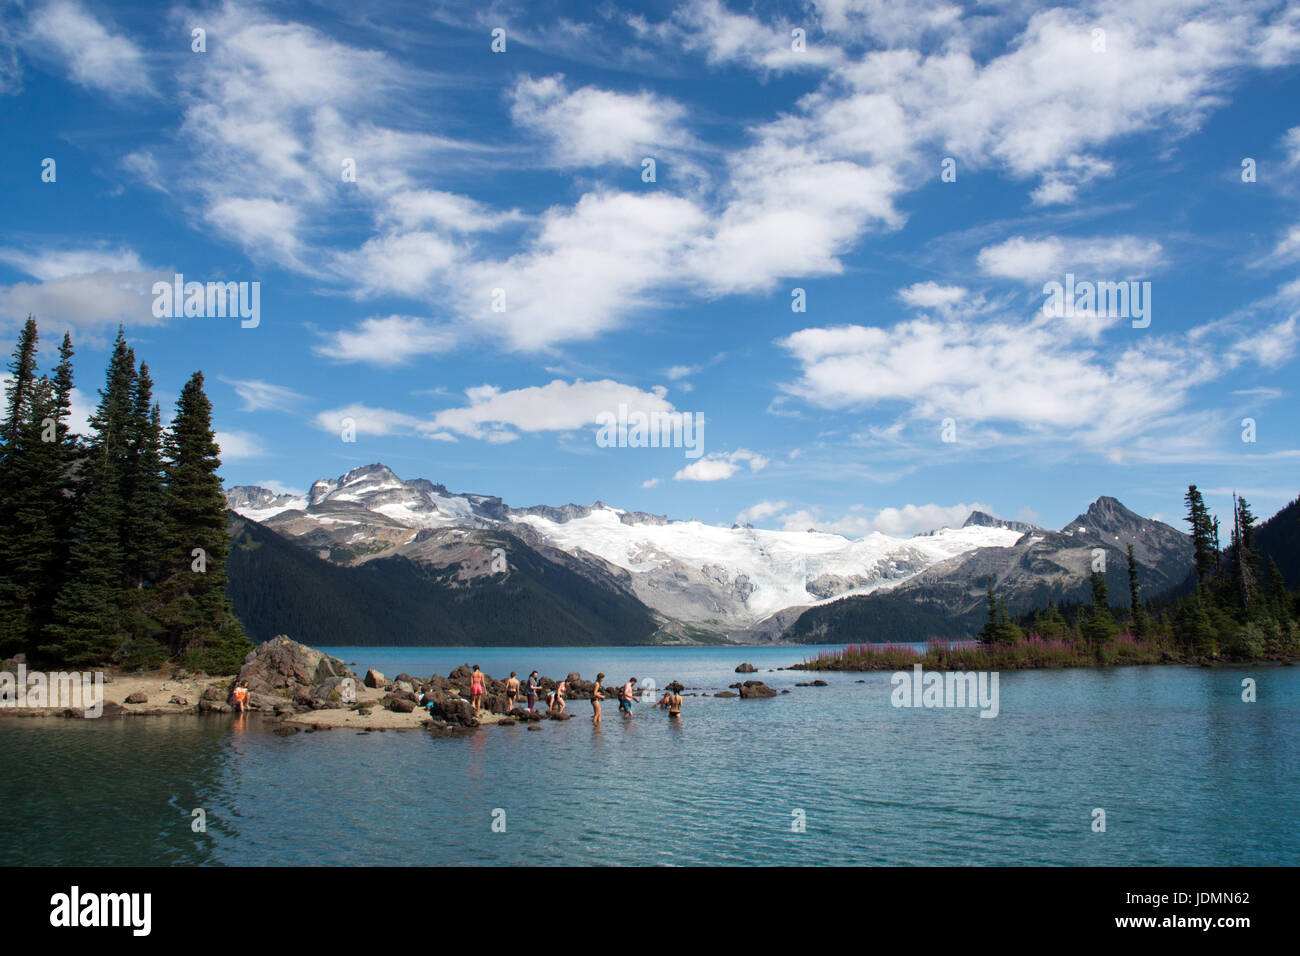 A group of people bathing in Garibaldi Lake, a glacial lake in the Coast Mountains of British Columbia, Canada, Stock Photo